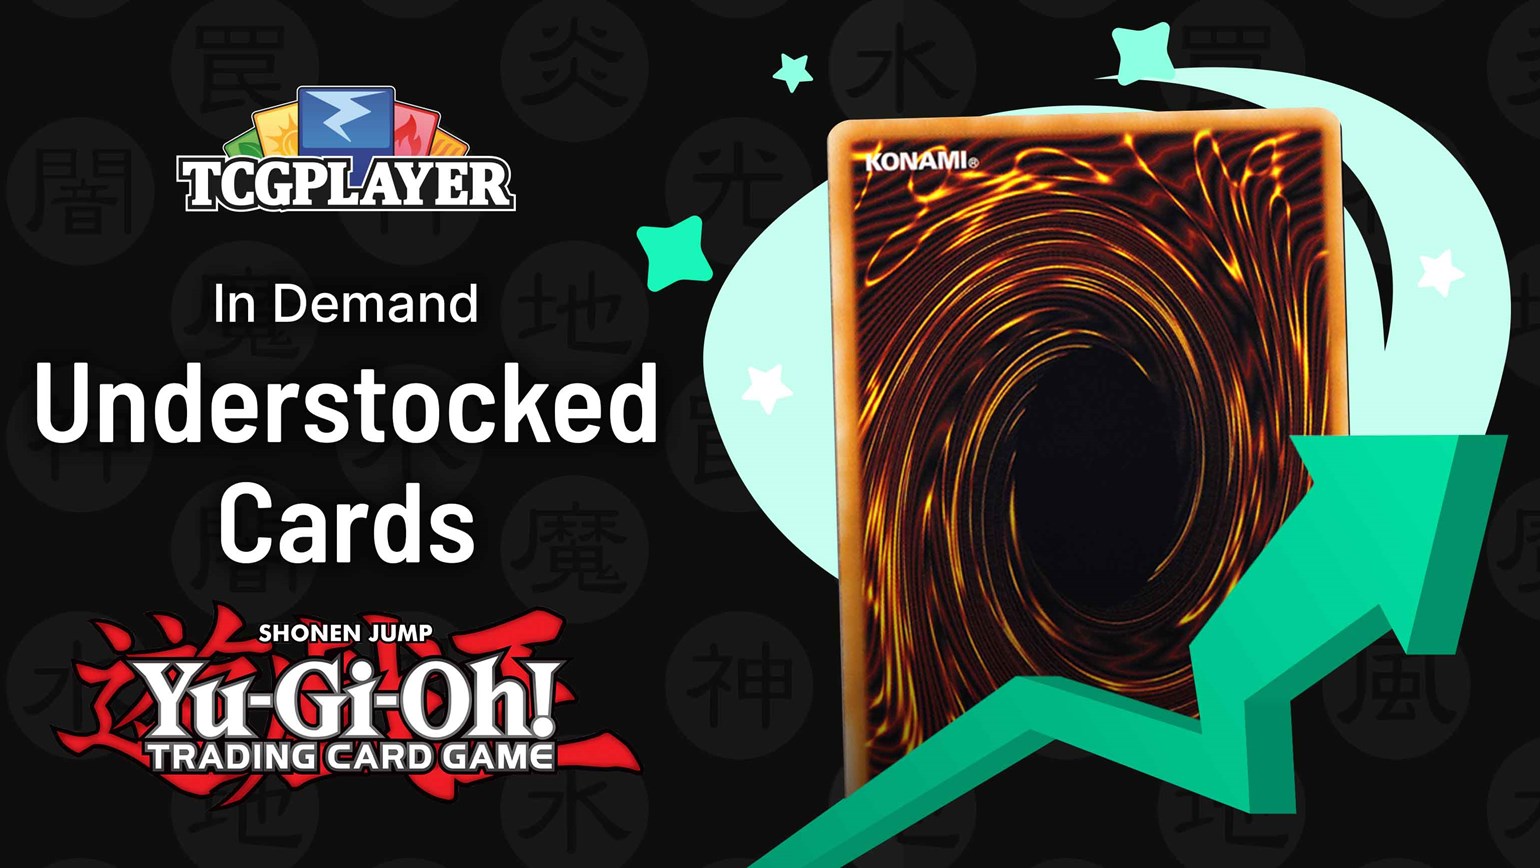 In Demand Understocked Cards on the TCGplayer Marketplace: Yu-Gi-Oh!